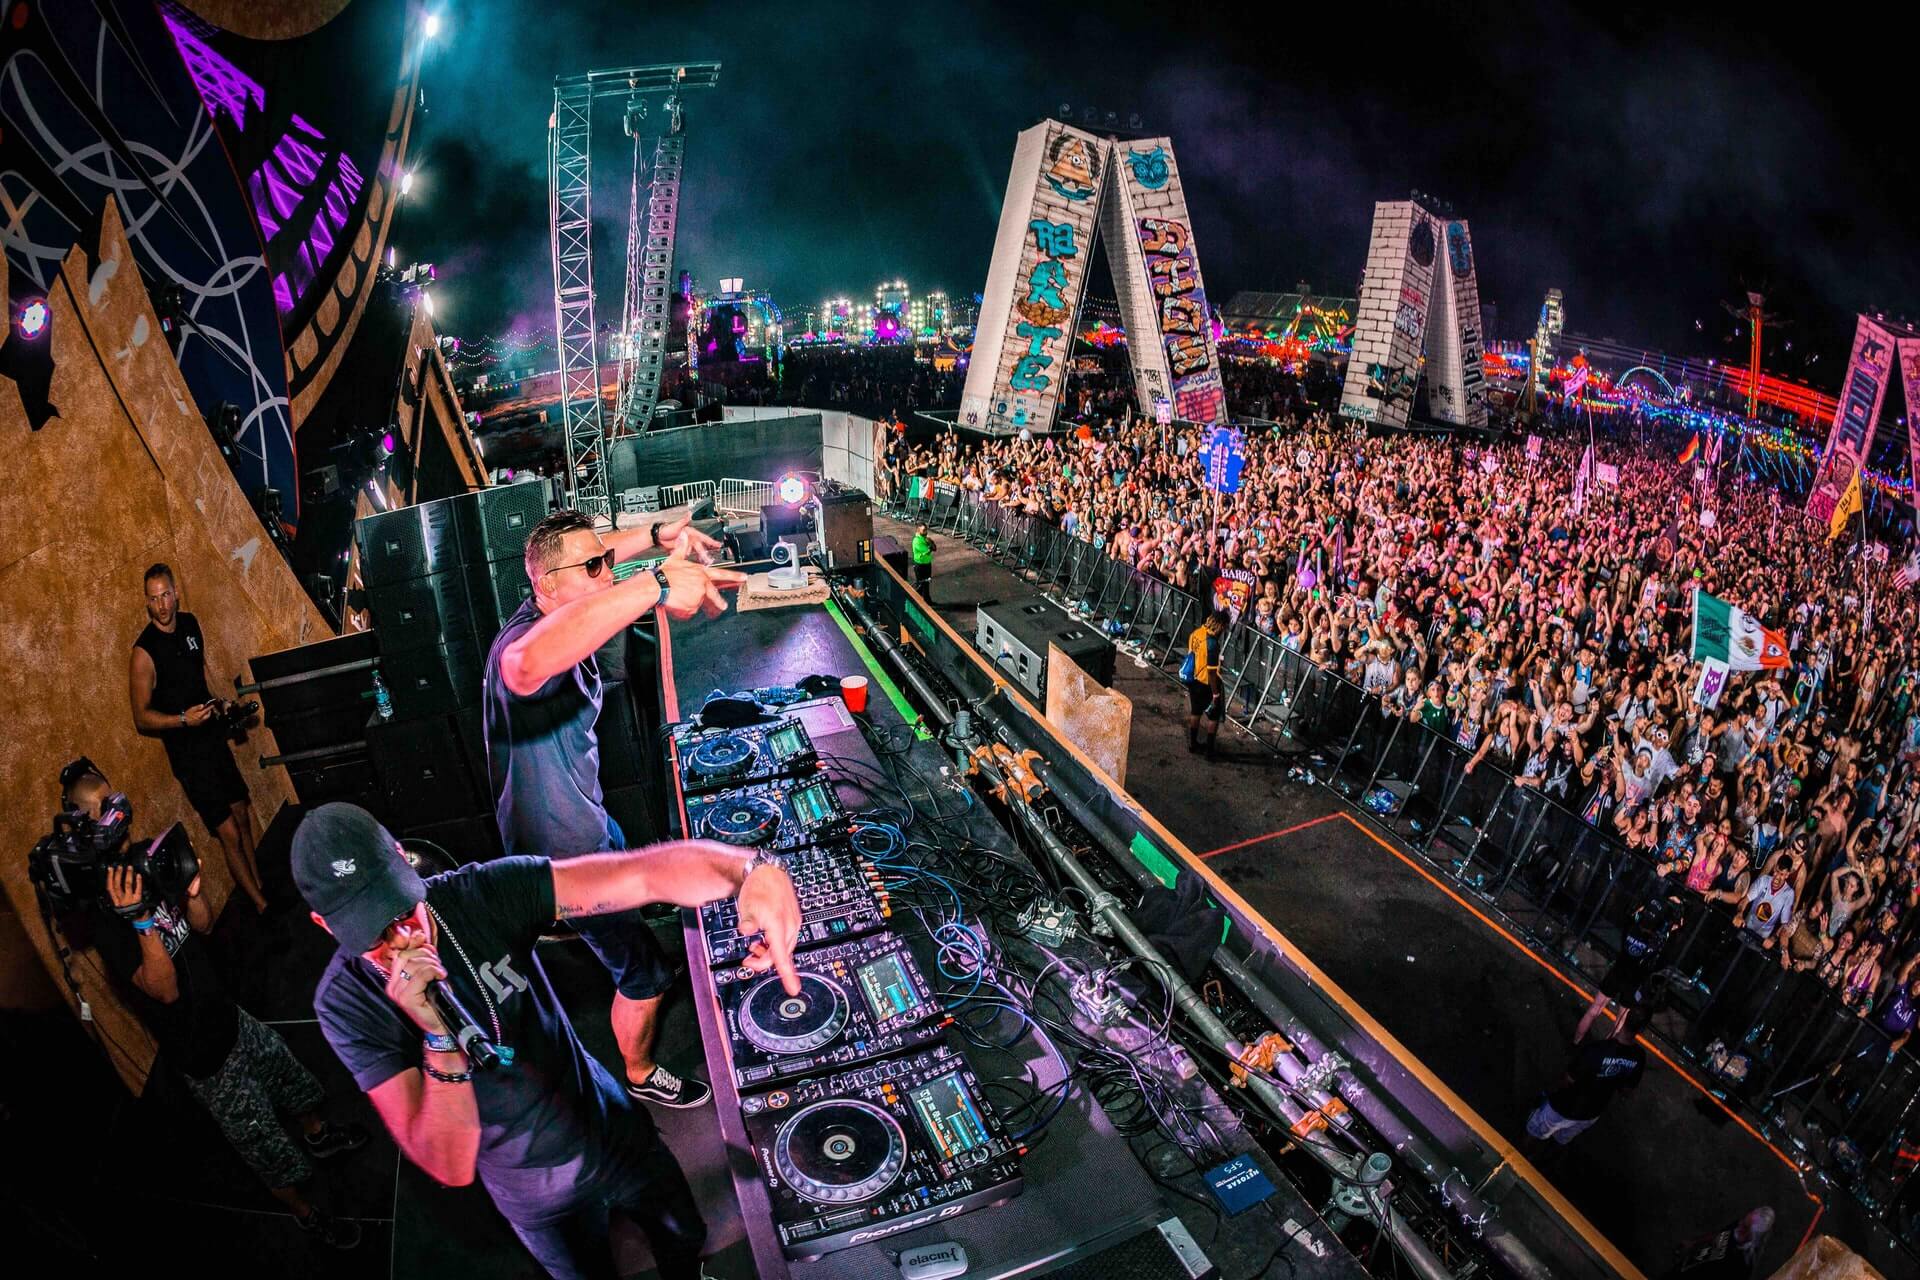 djs playing to a packed crowd at edc las vegas